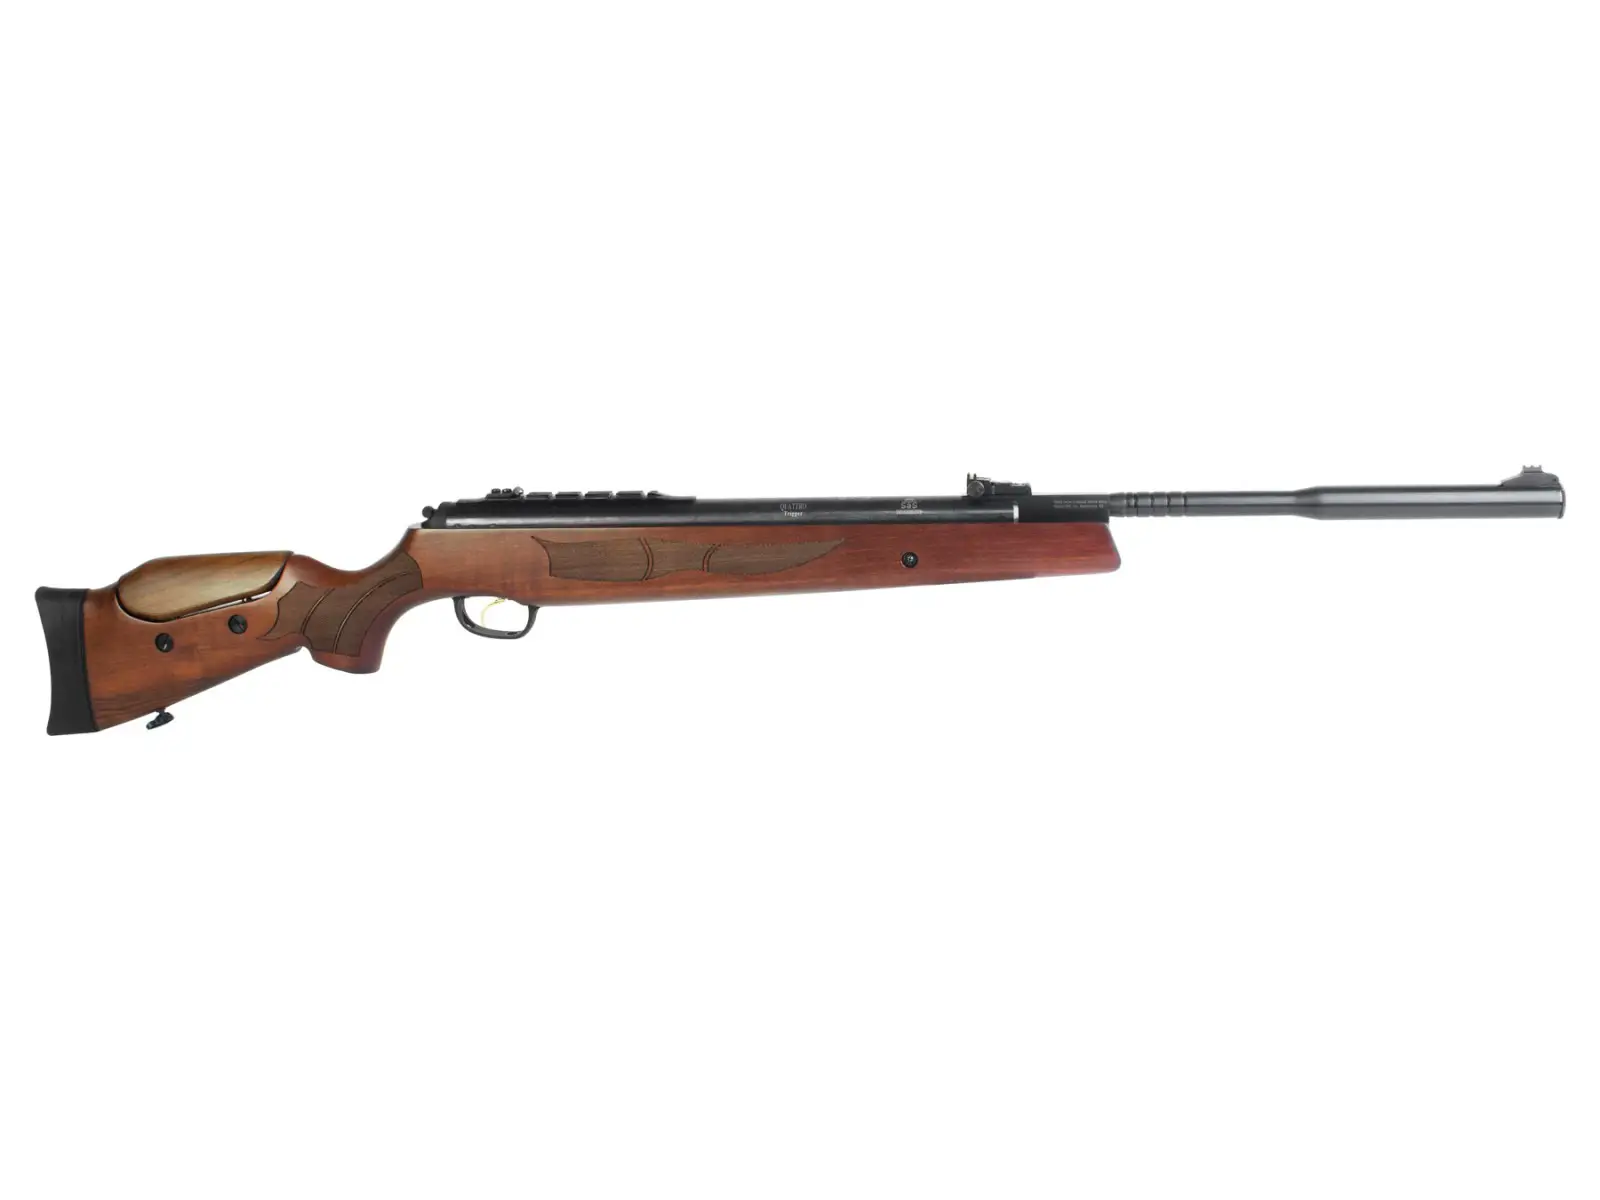 135 1 Best .22 Air Rifles - Top 11 fantastic guns for the money (Reviews and Buying Guide 2022)